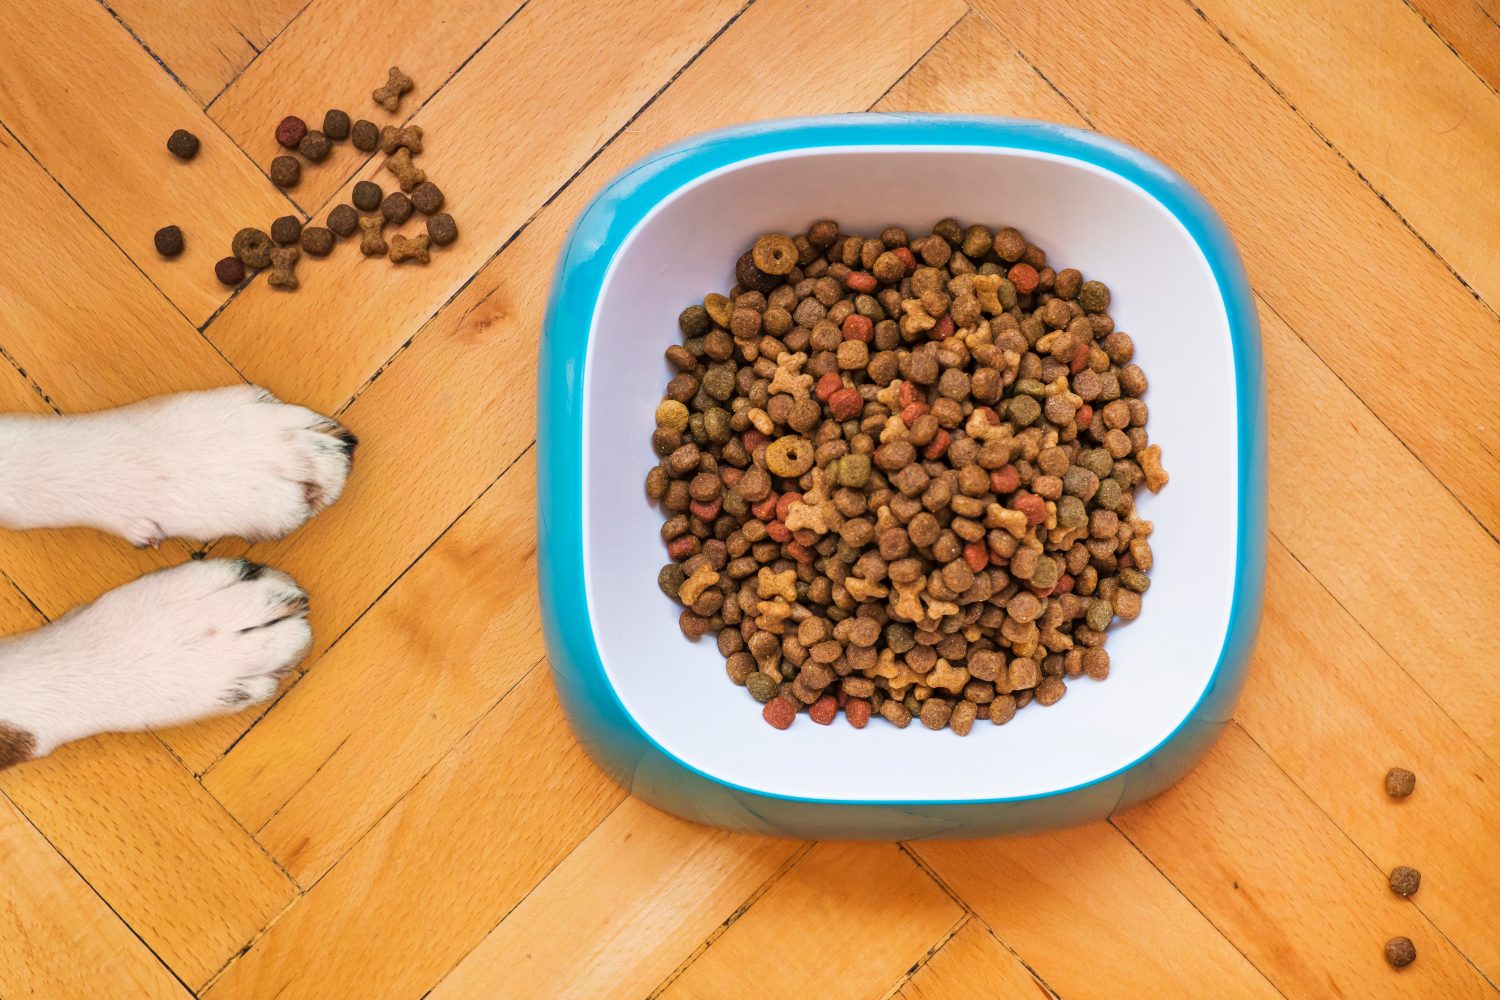 How To Pick Best Dog Food For Your Pup